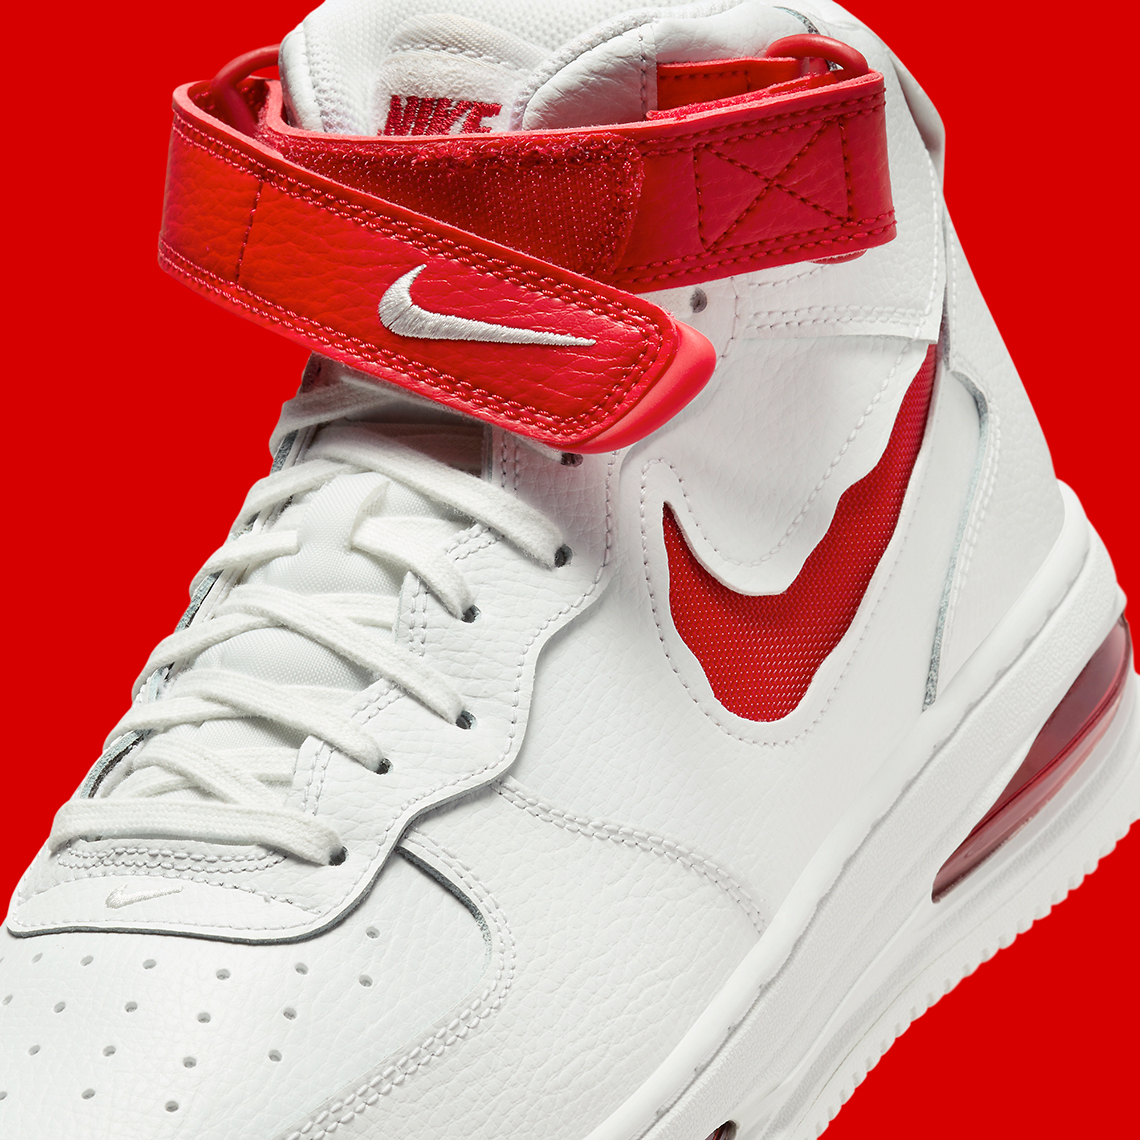 nike air force 1 max white red FB1374 102 7